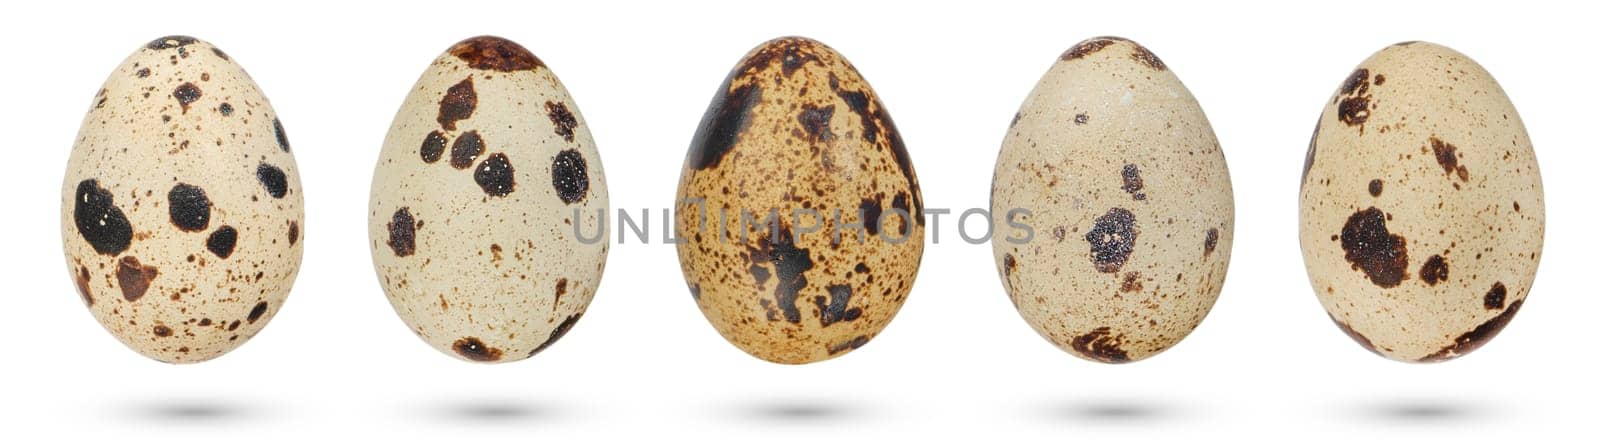 Quail eggs on a white isolated background. Natural ecological food. Quail eggs of natural spotted color